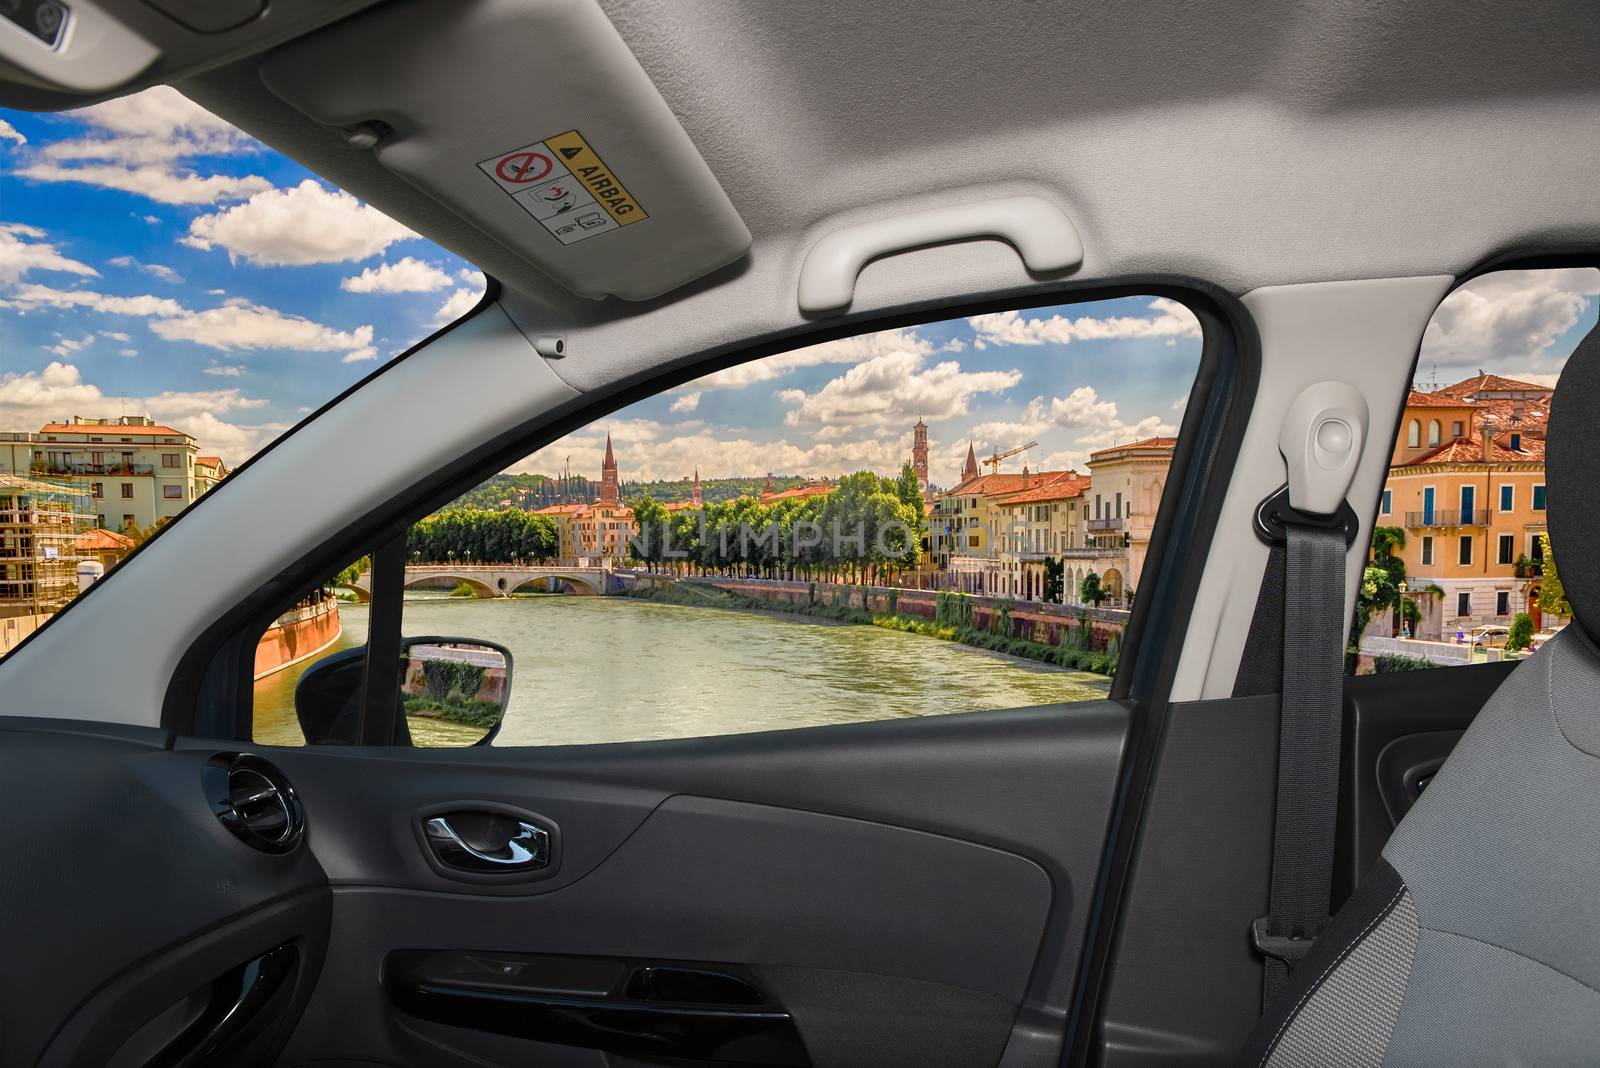 Looking through a car window with view over Adige River in central Verona, Italy